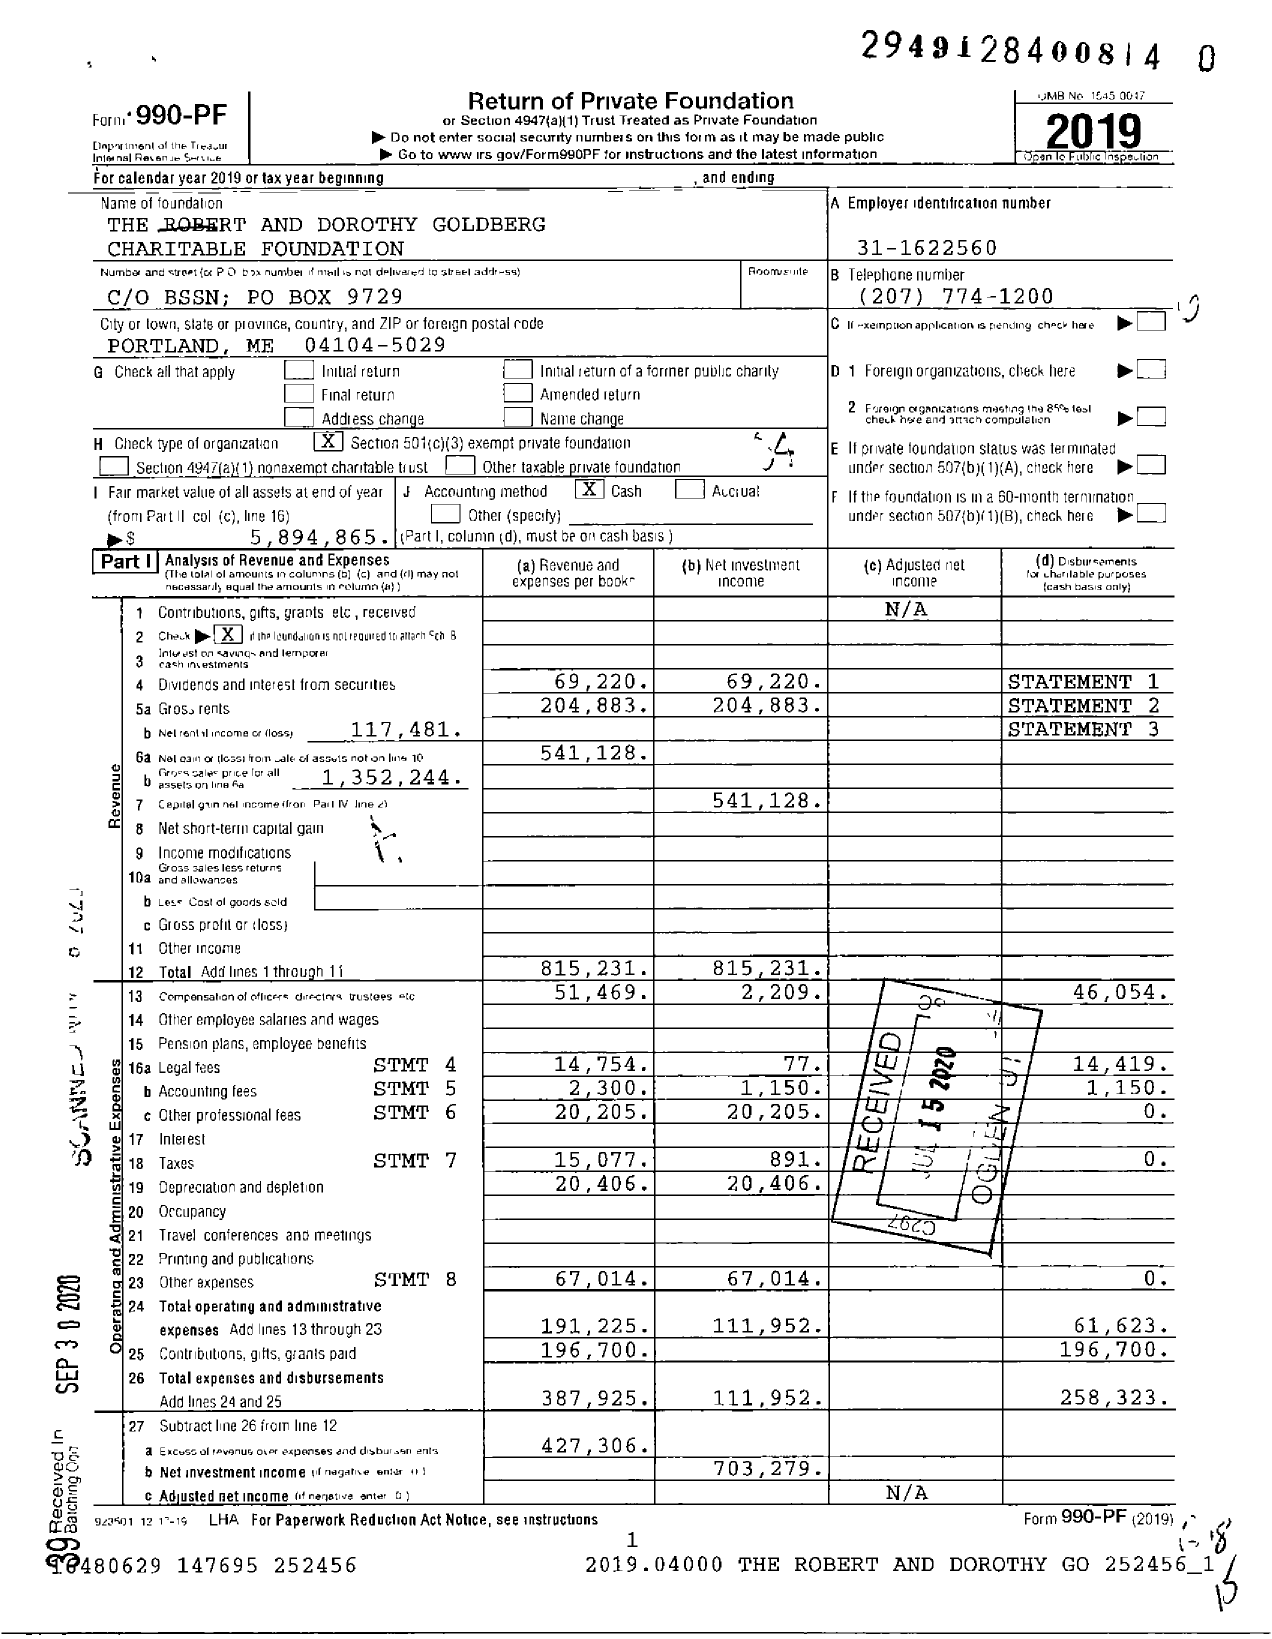 Image of first page of 2019 Form 990PF for The Robert and Dorothy Goldberg Charitable Foundation